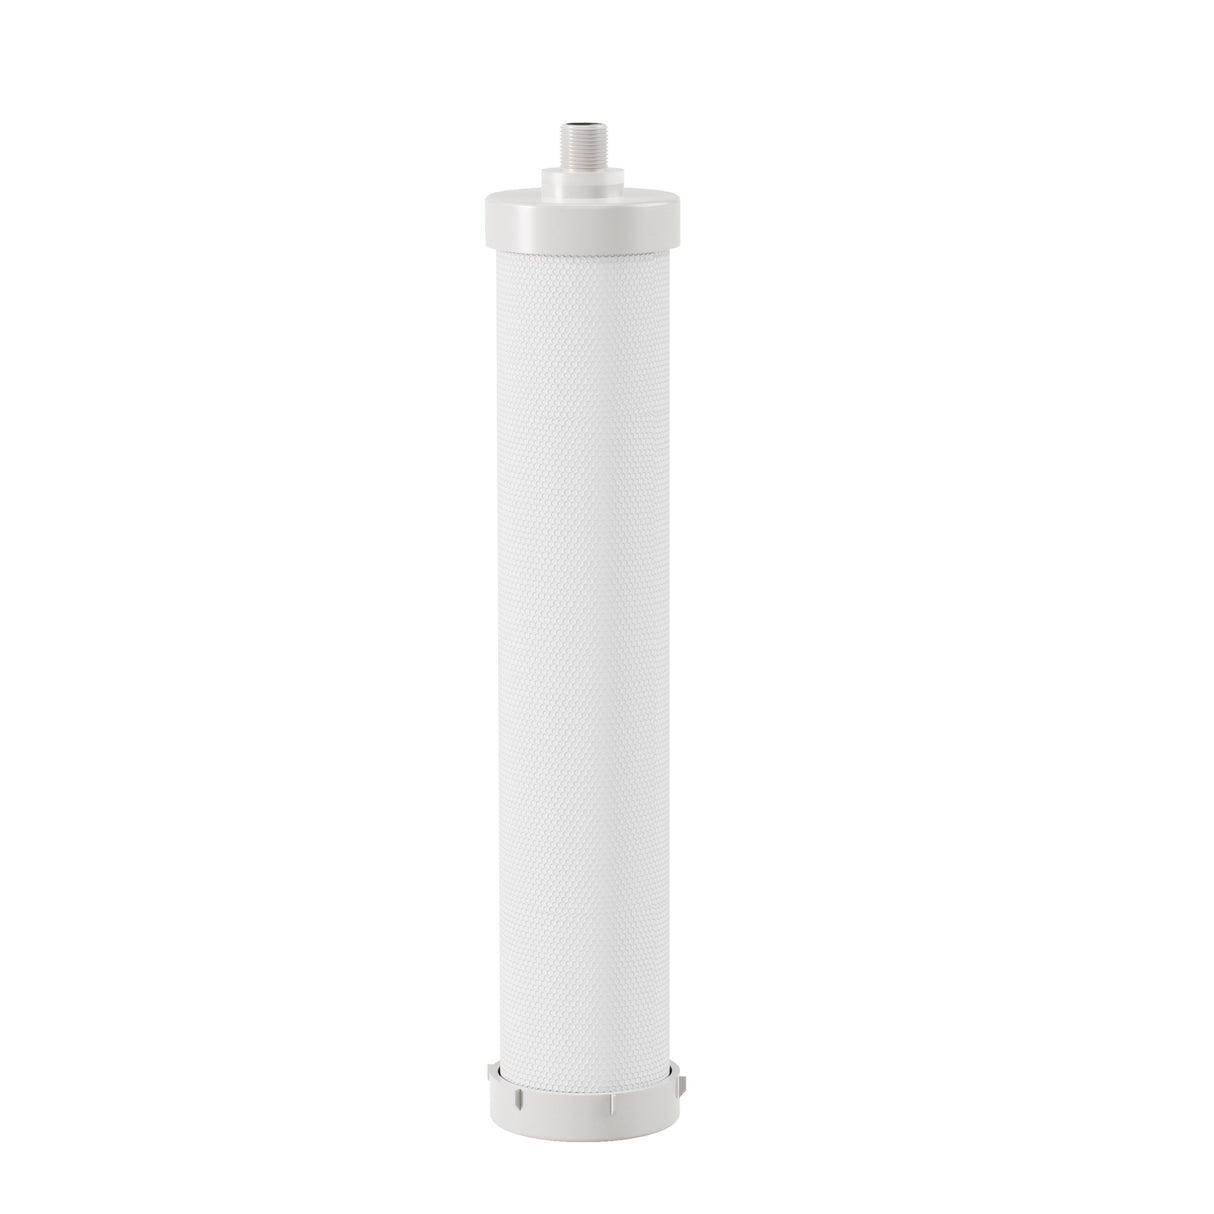 Frizzlife DSFPP (1st Stage) Replacement Filter Cartridge for TS99 Countertop Stainless Steel Water Filter System